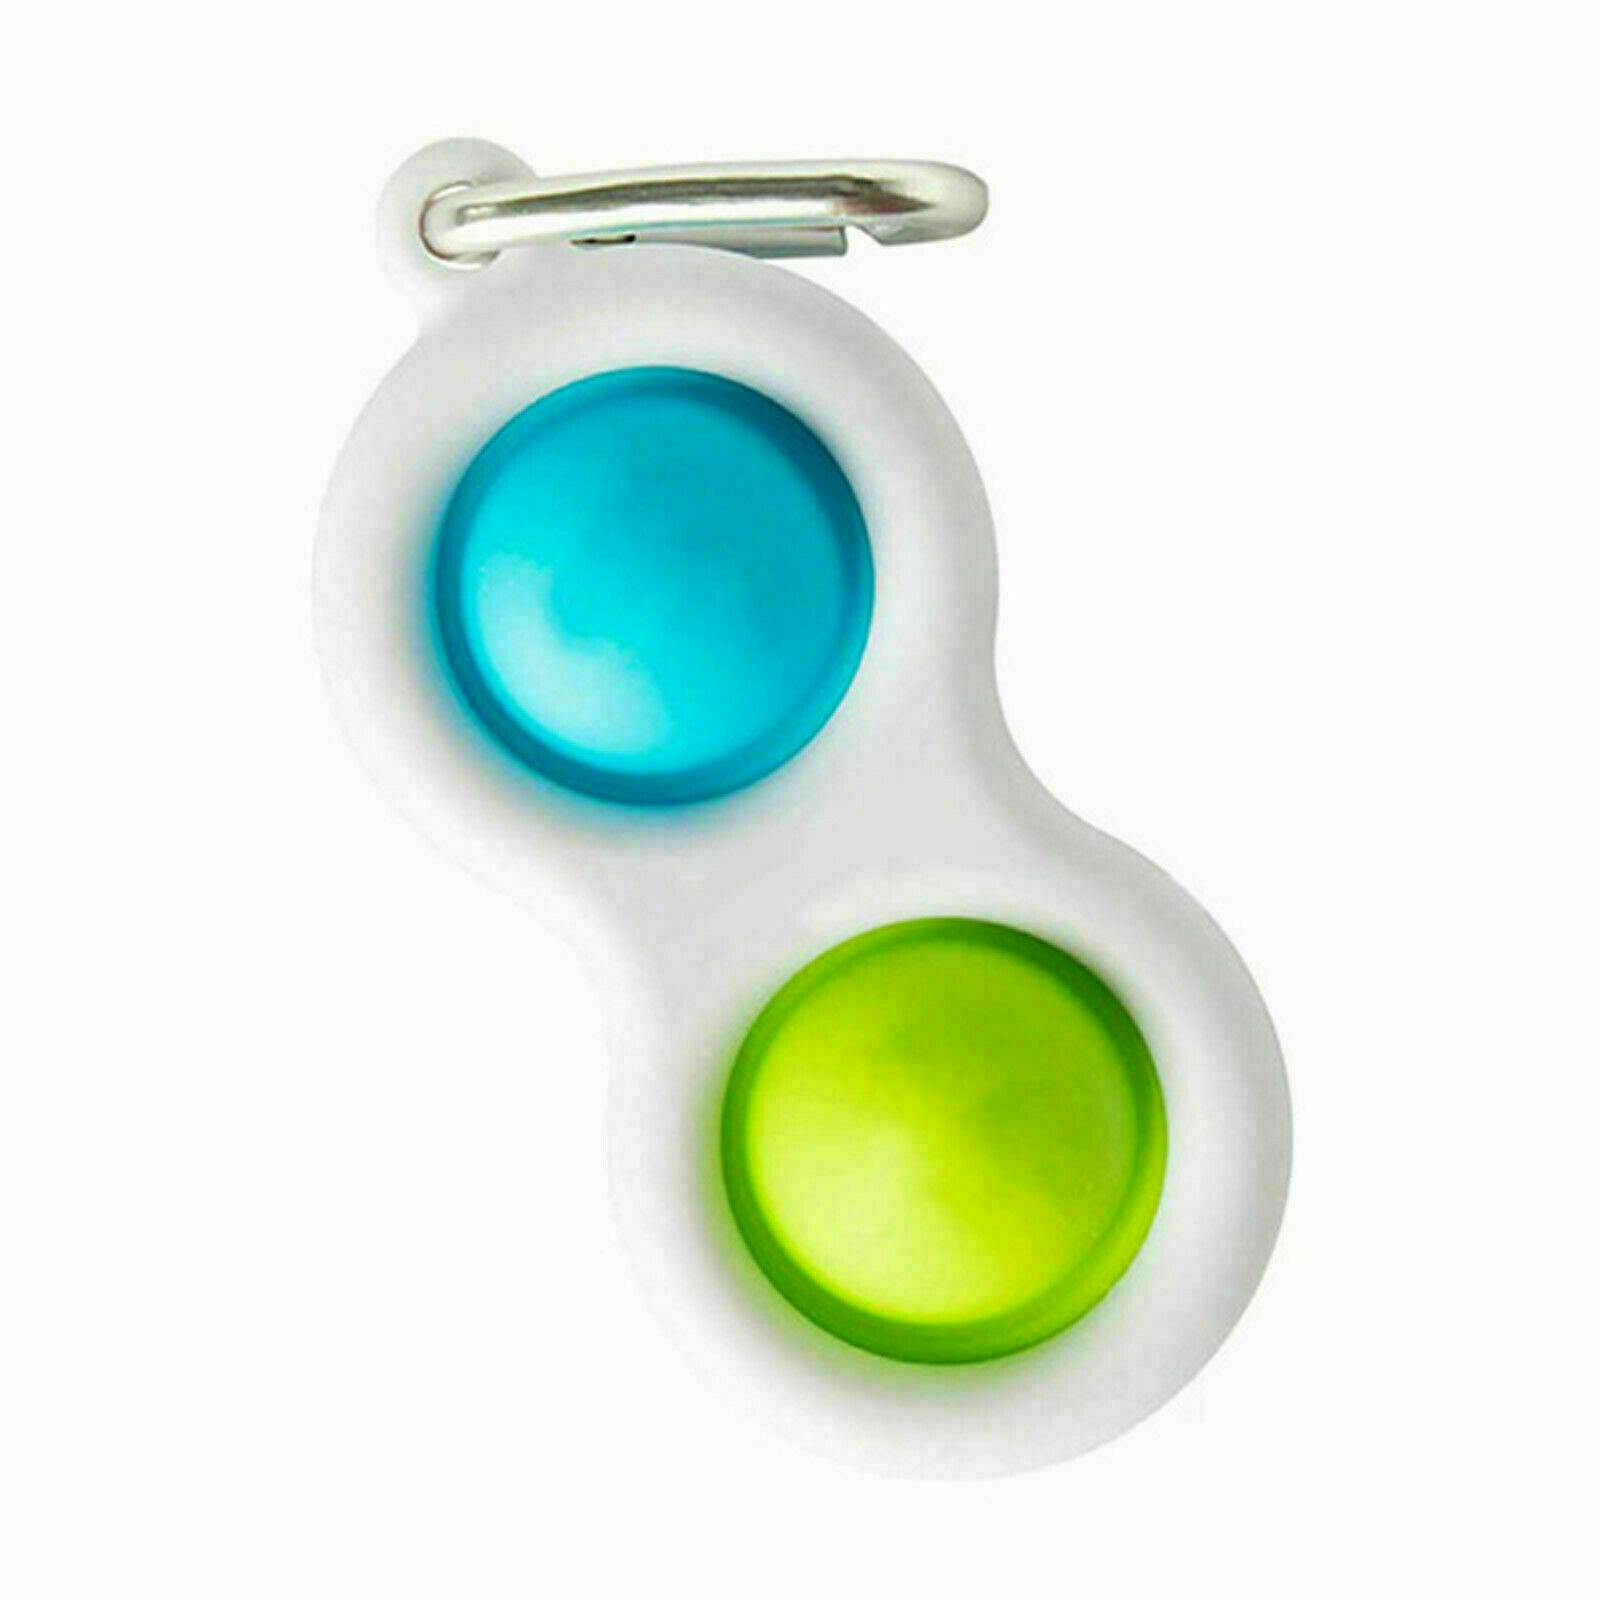 Green and Blue Kid Simple Dimple Special Needs Silent Sensory Fidget Toy Autism Classroom Adult